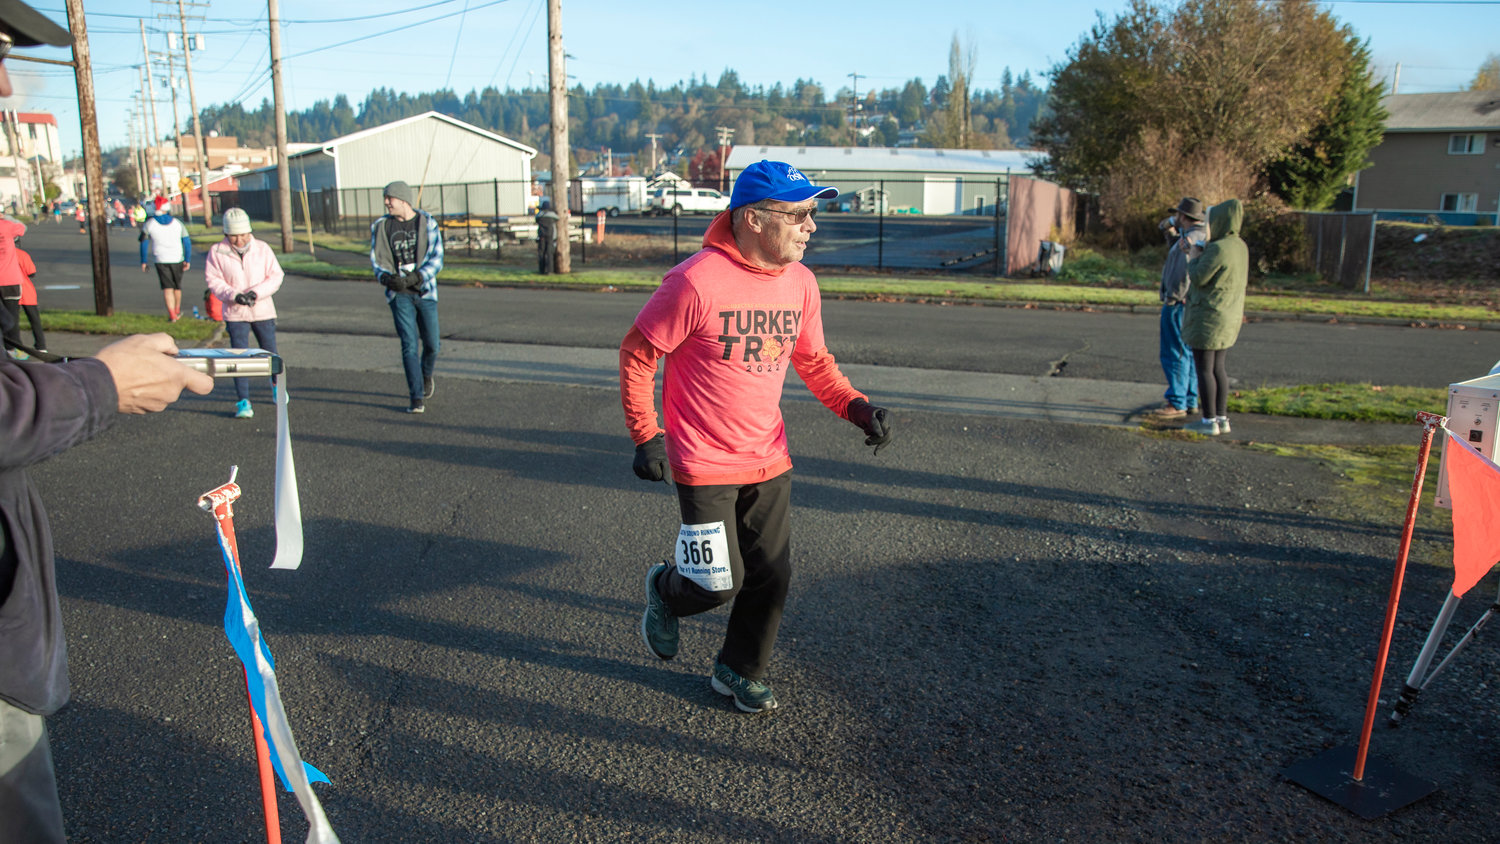 Neal Kirby, 70, runs through the finish line after completing the Turkey Trot 5K Thanksgiving morning outside Thorbeckes in Chehalis.